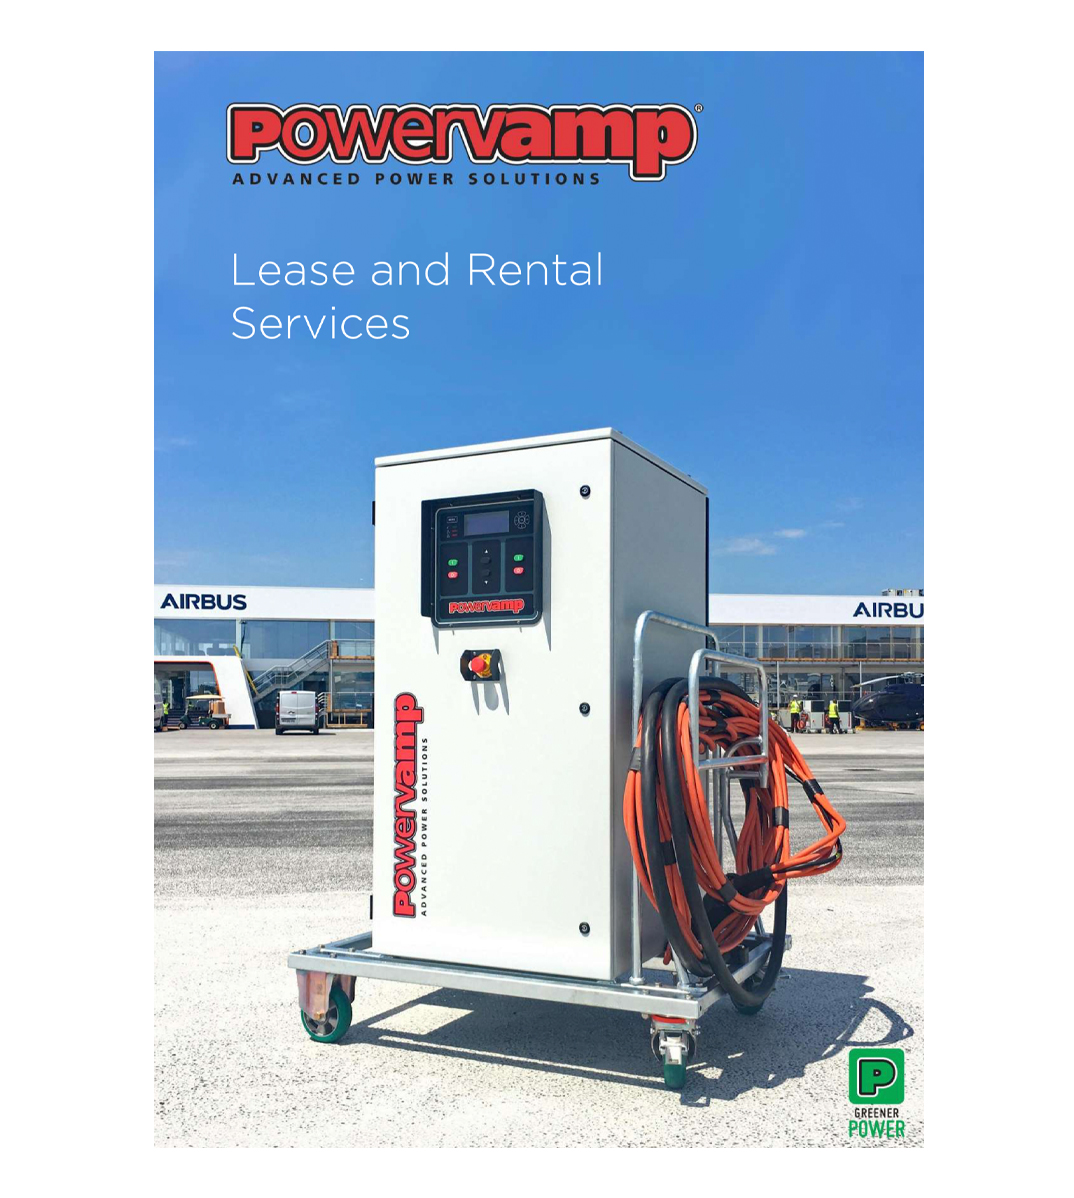 Powervamp lease and rental services brochure cover